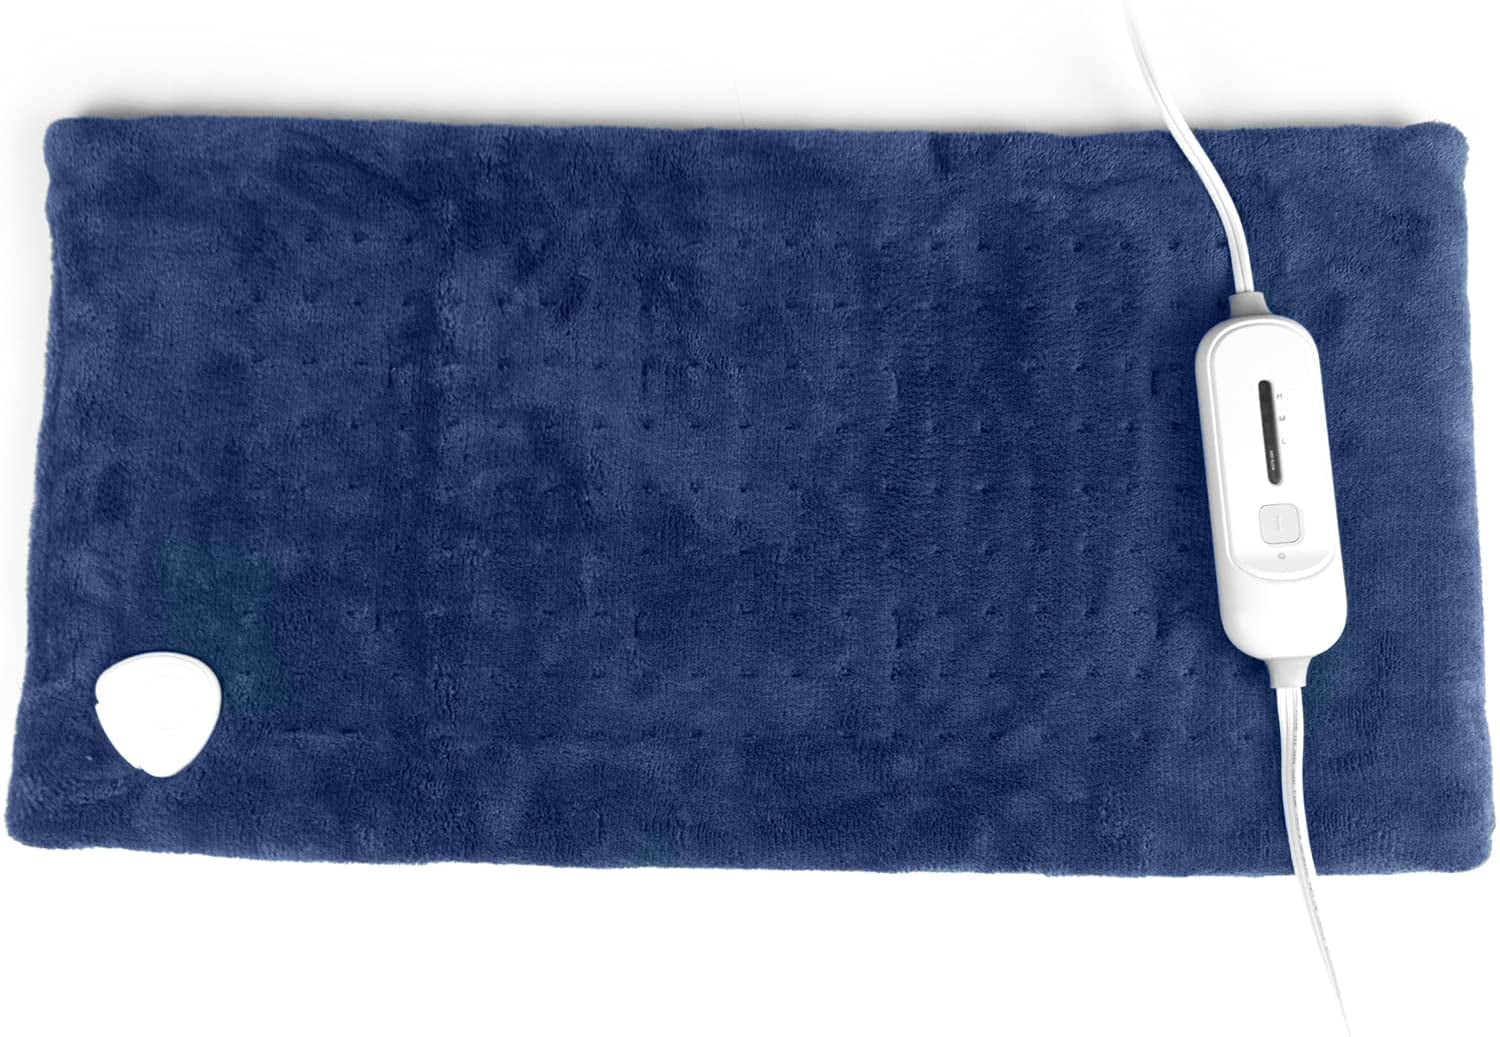 SUNAID Weighted King Size Large Heating Pad 12&quot; x 24&quot; (NAVY)